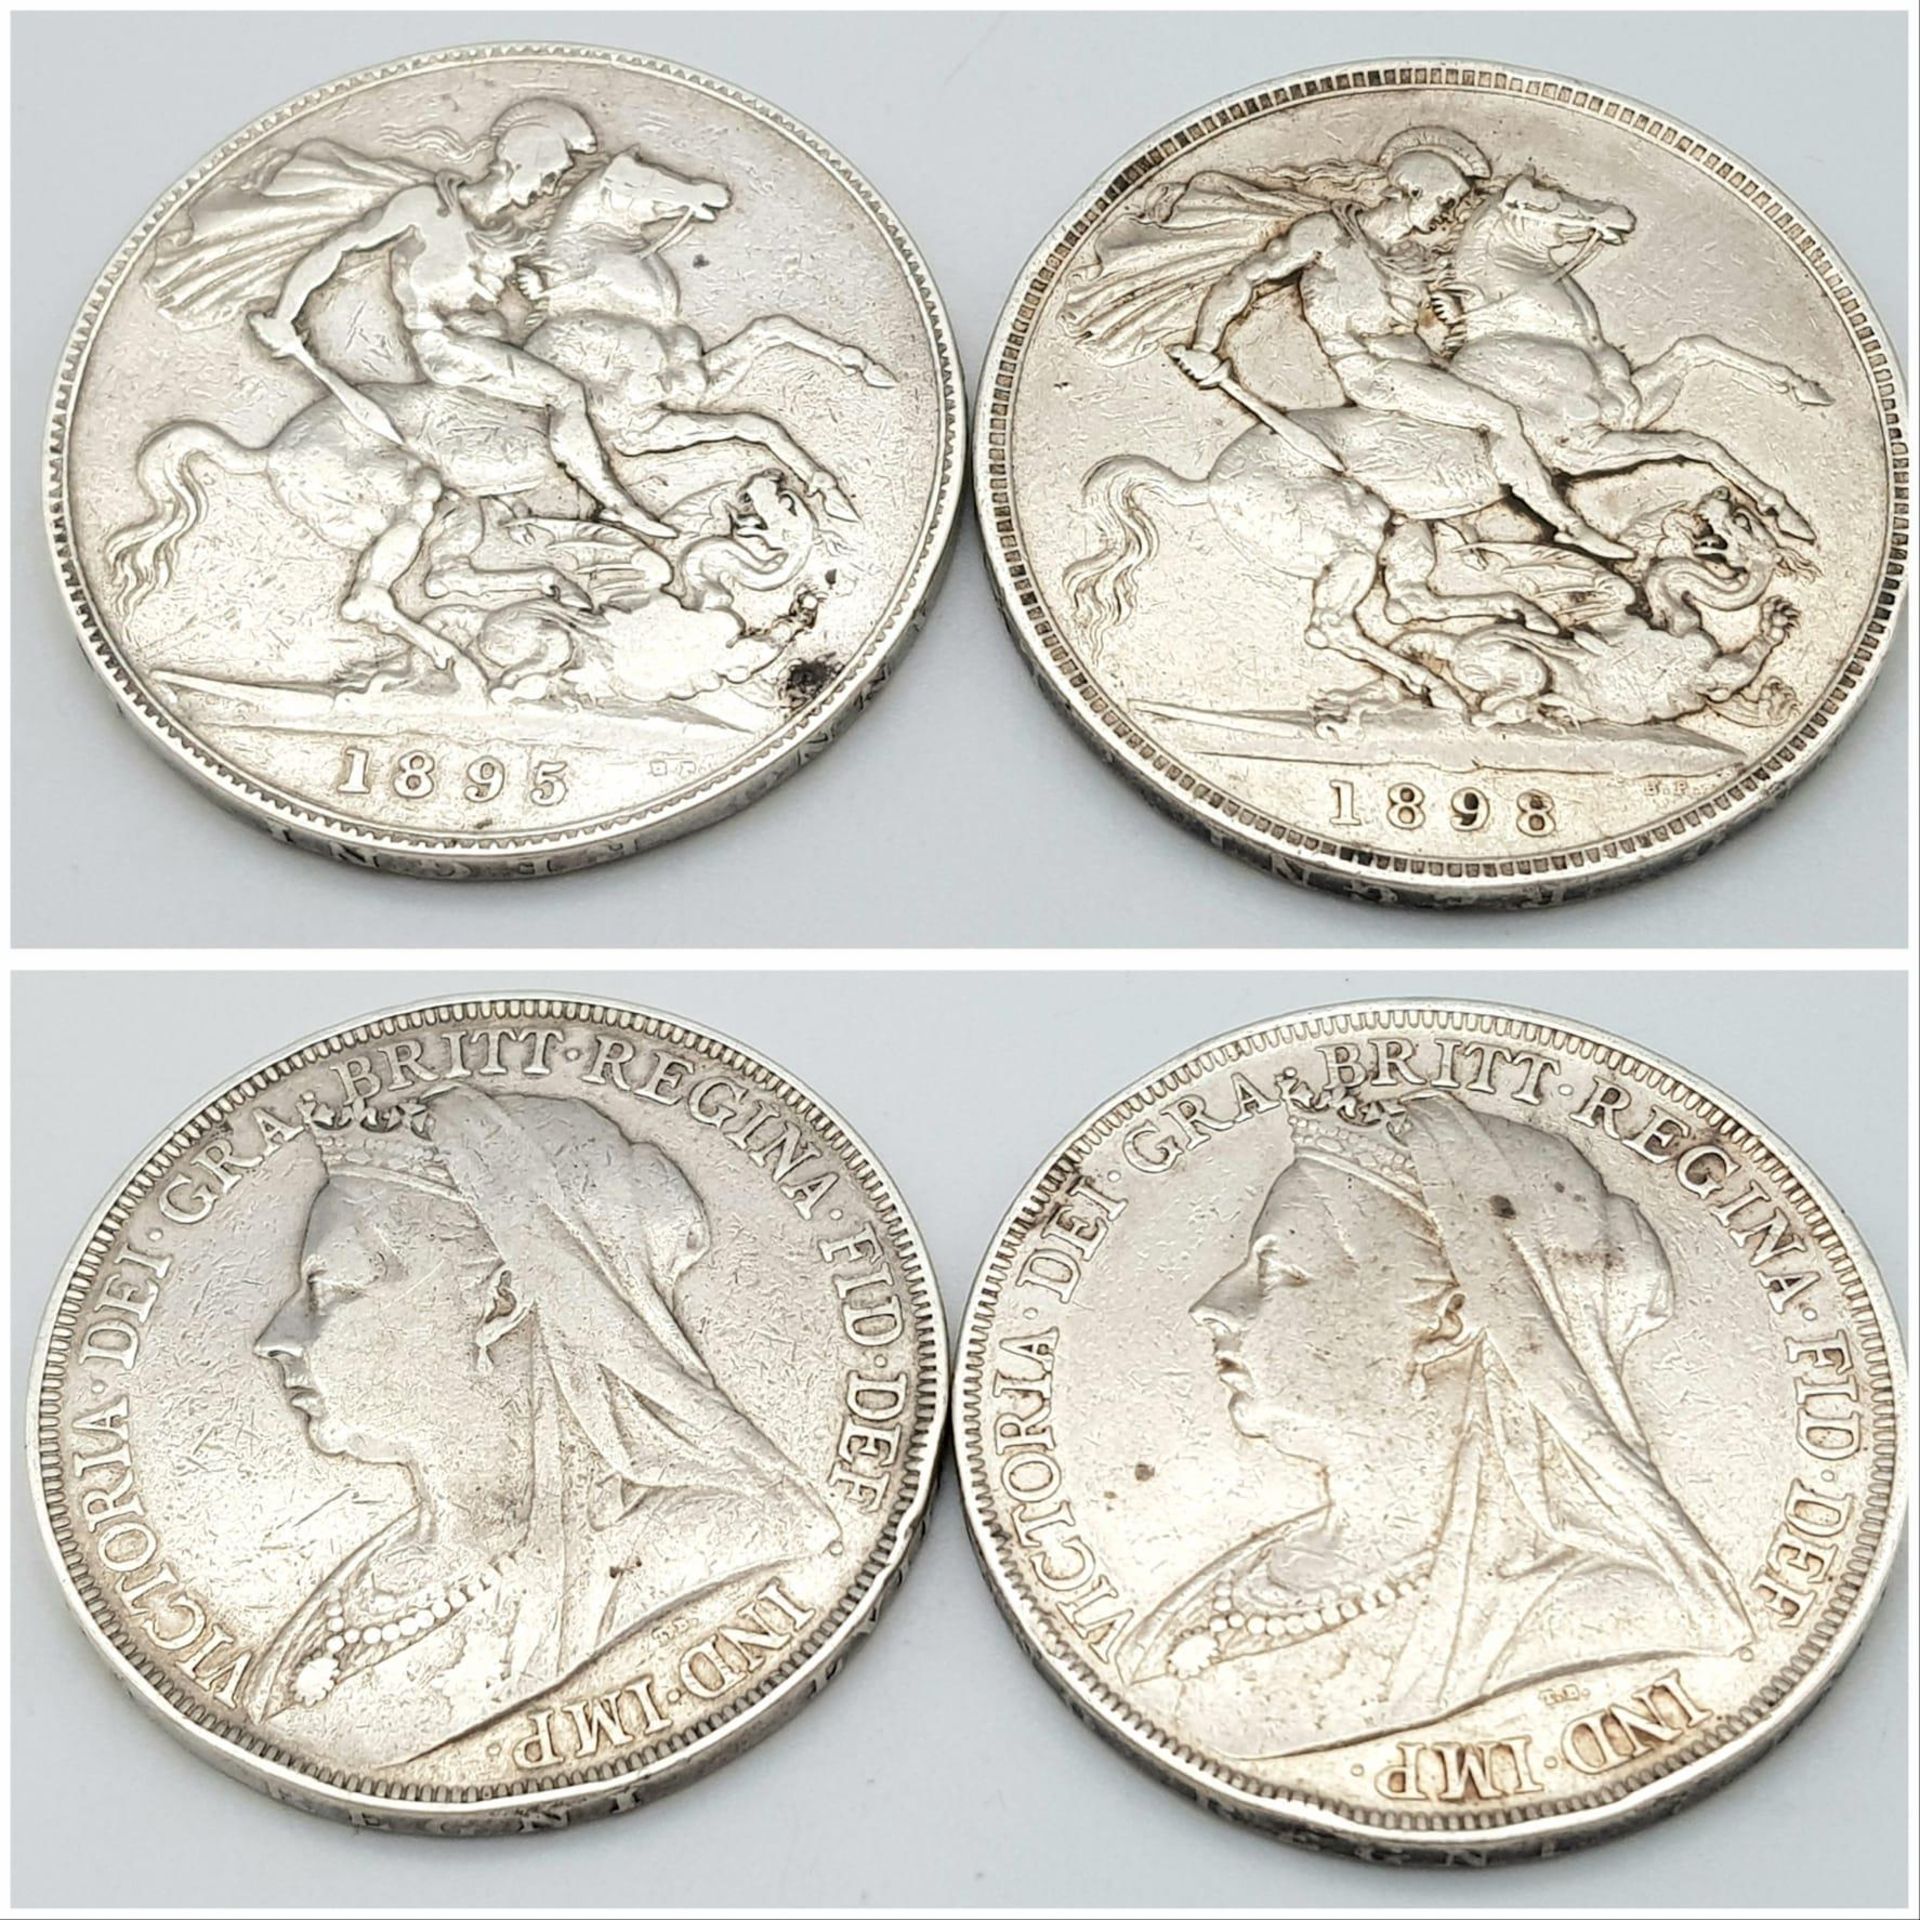 Two Queen Victoria Silver Crown Coins - 1895 and 1898. Please see photos for conditions.